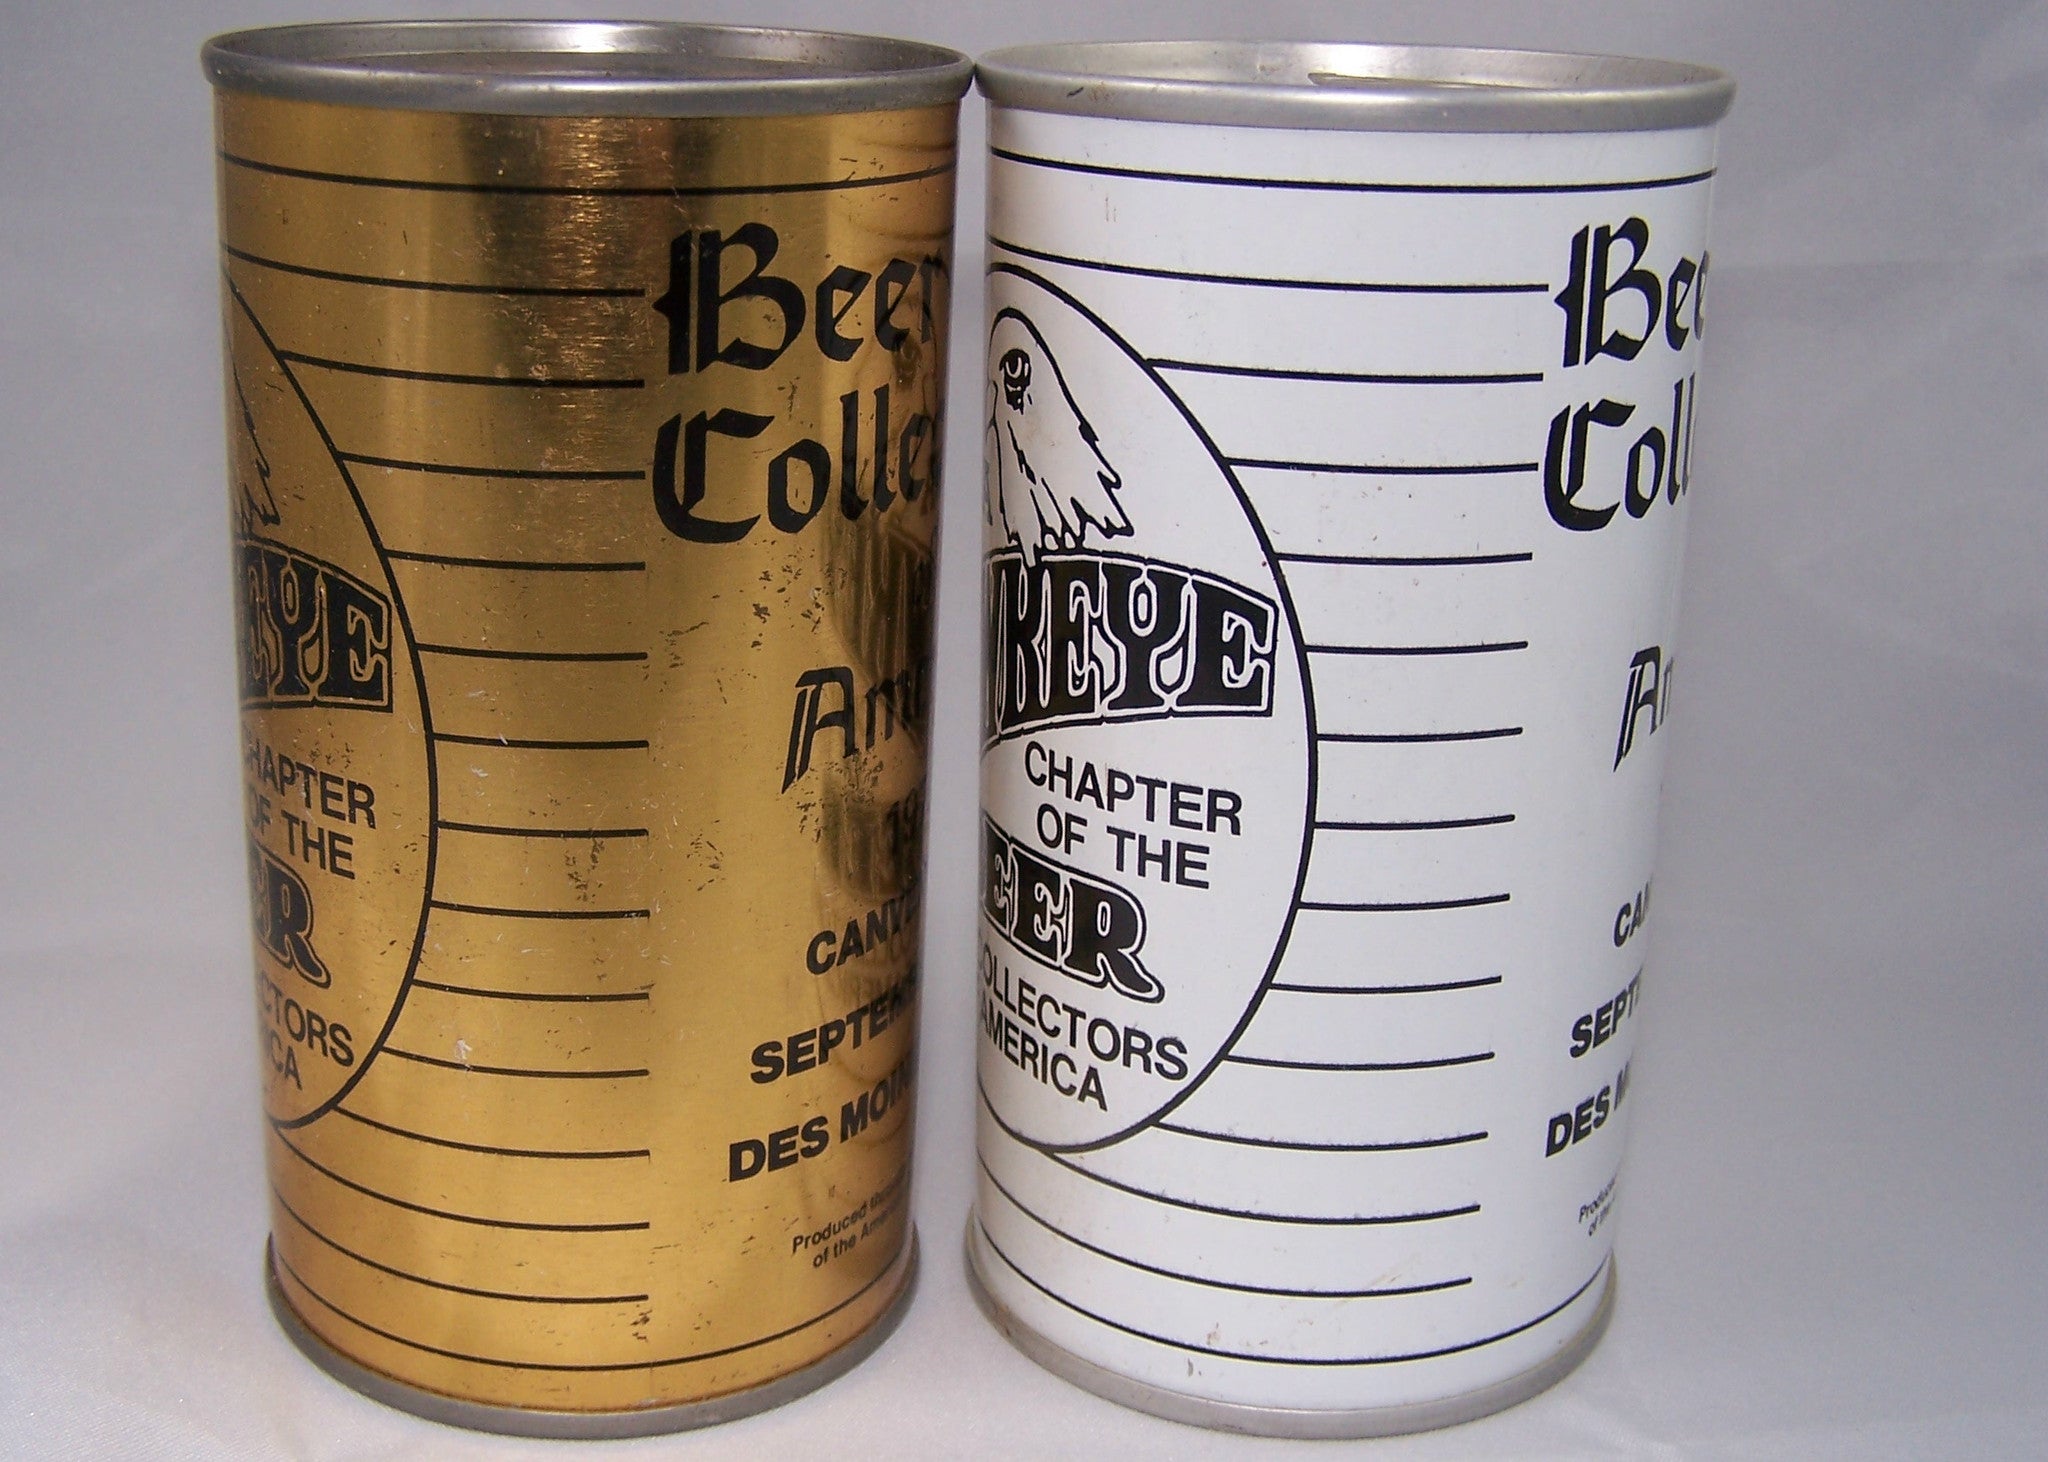 Pair of BCCA 1975 Canvention cans, USBC II 208-30, and Test can. Sold 6/25/15